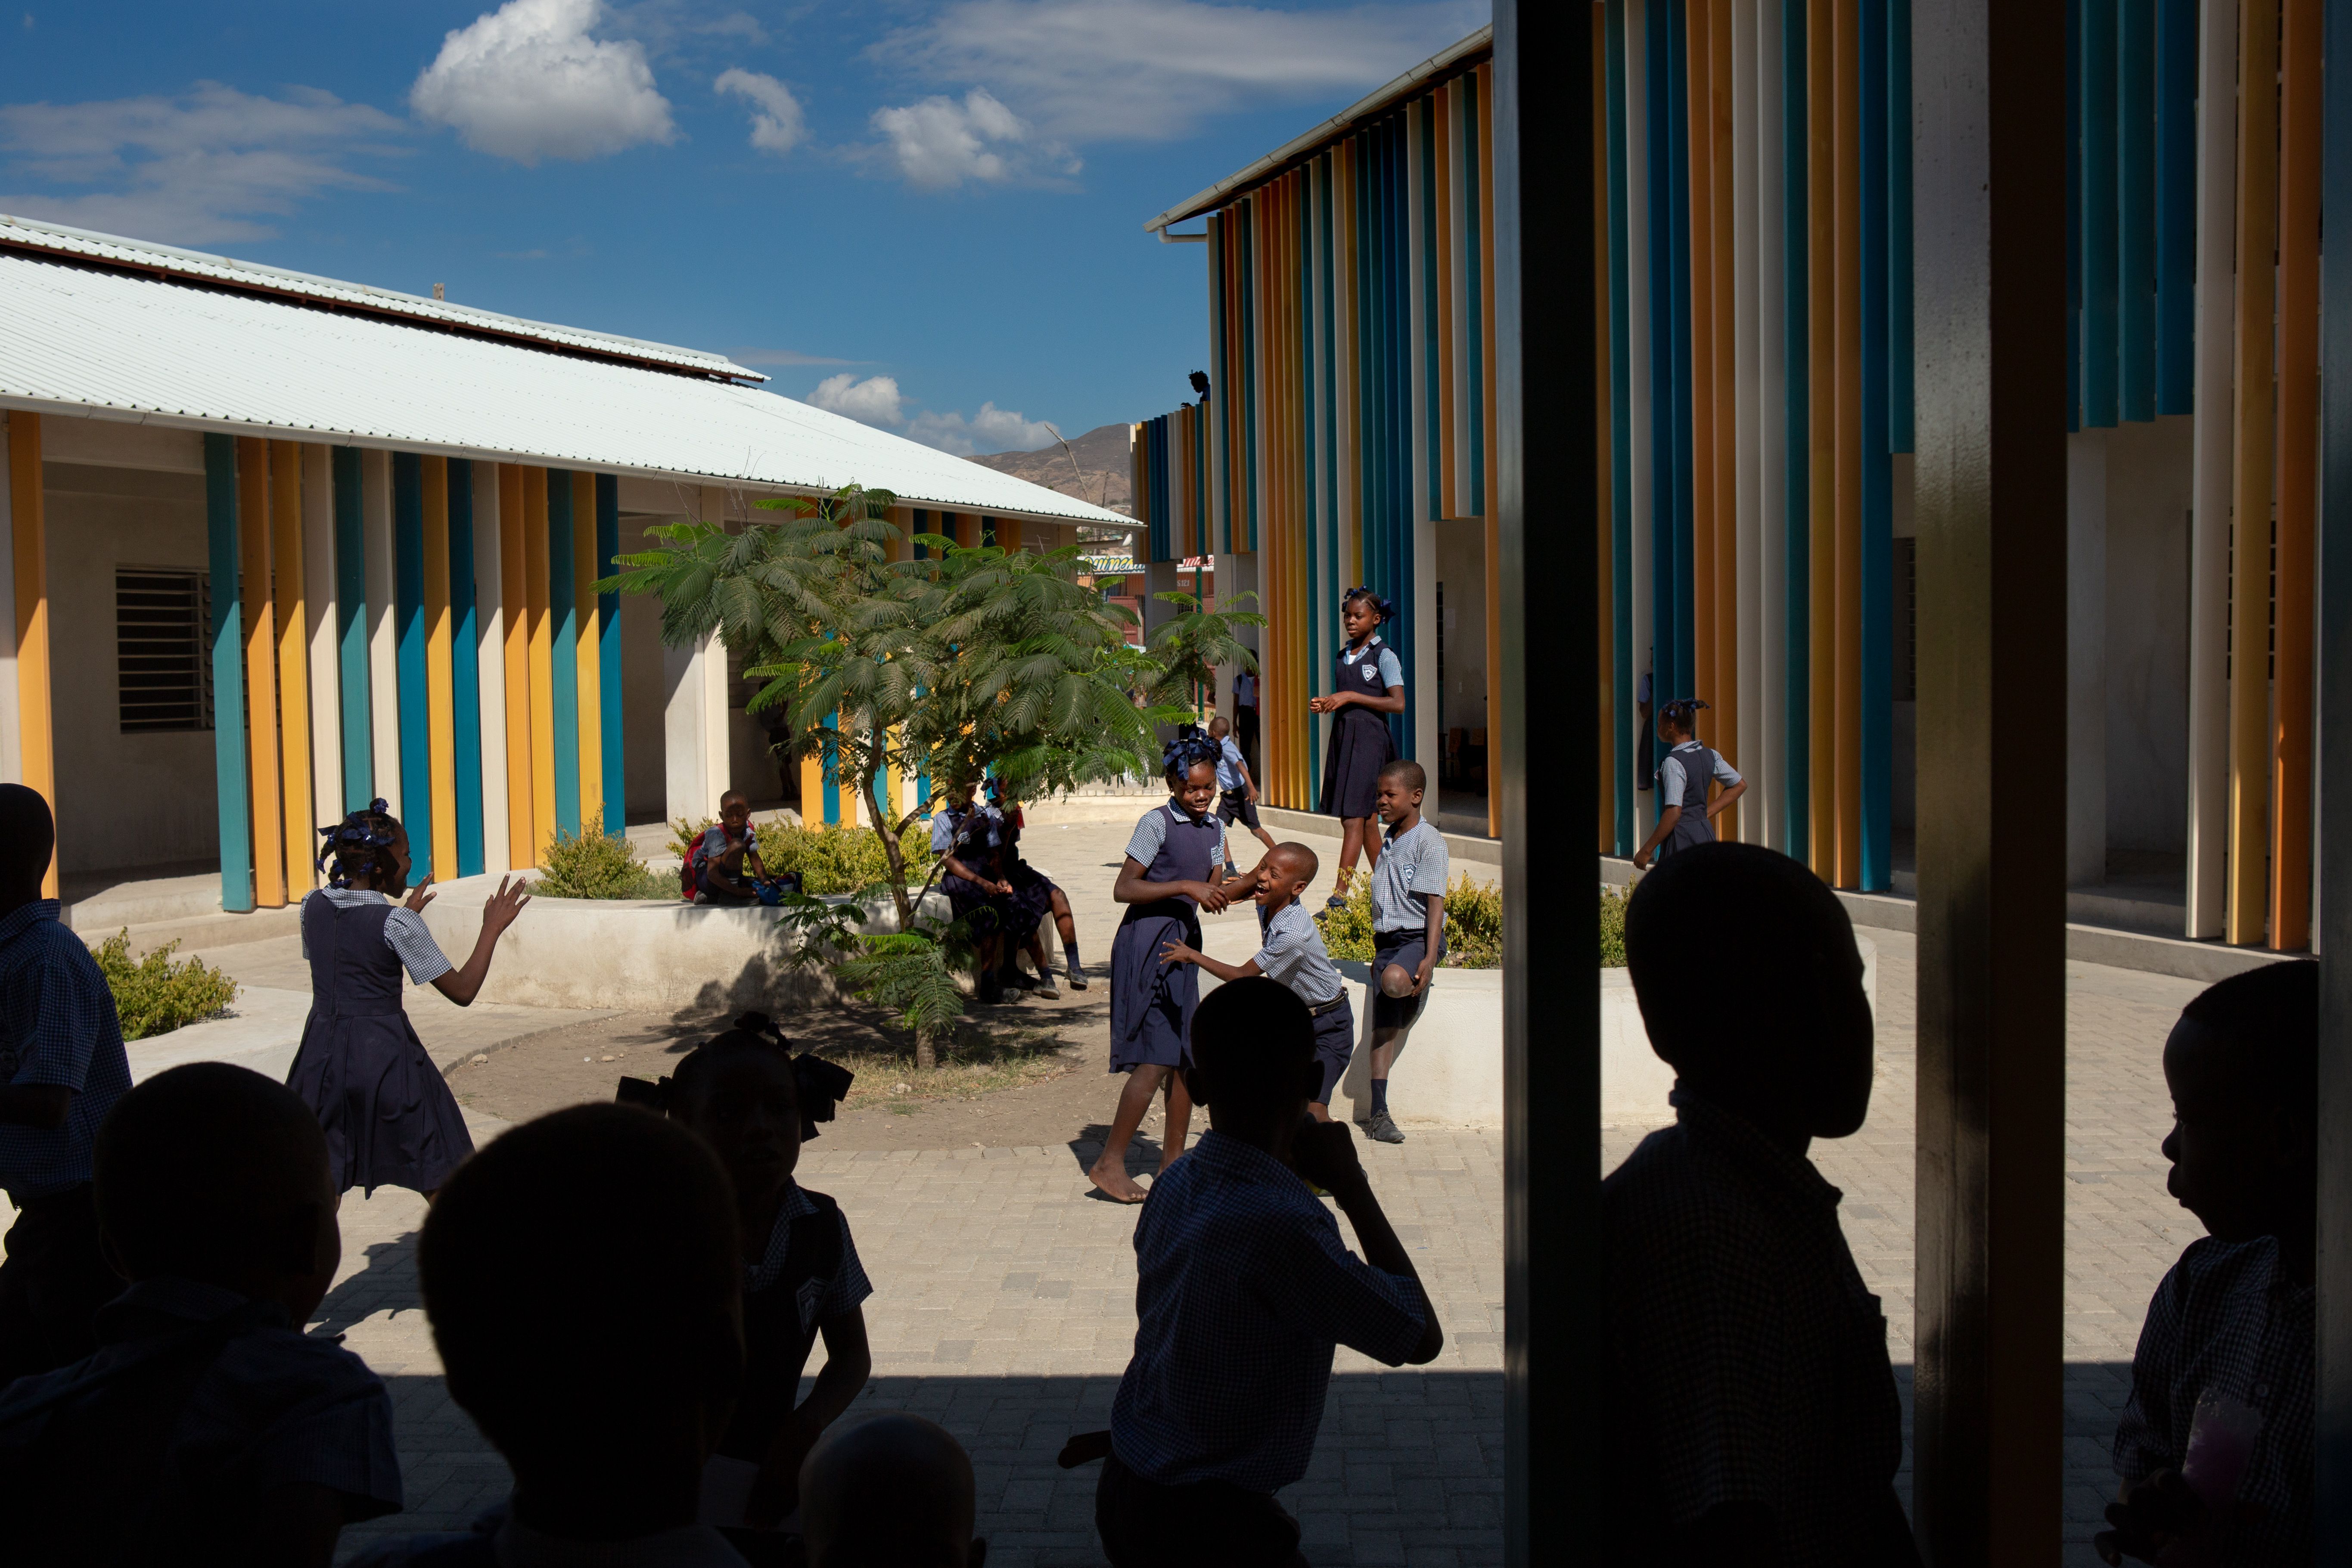 Students begin morning recess at Ecole Fondamentale Complete Breda de Canaan in the Canaan 3 neighborhood. The K-8 facility is the first public school in greater Canaan. Students who score at the top of a competitive entrance exam are accepted to the school, which opened in fall 2018 and already has a long waiting list. Image by Allison Shelley. Haiti, 2019.